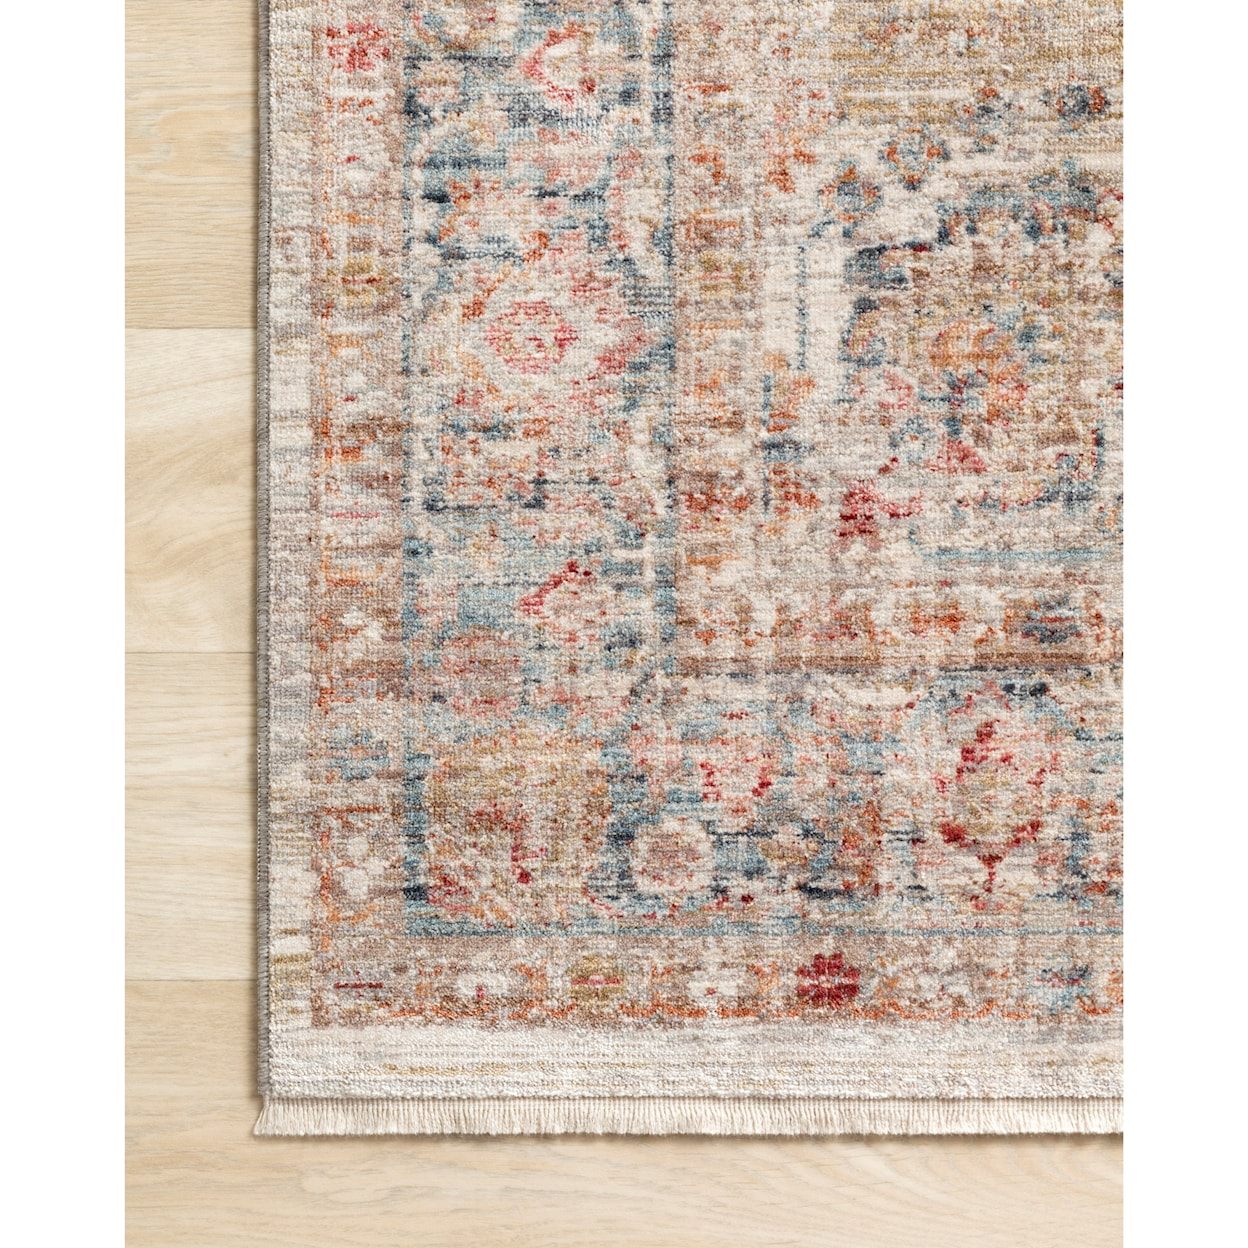 Loloi Rugs Claire 9'6" x 13' Ivory / Ocean Rug